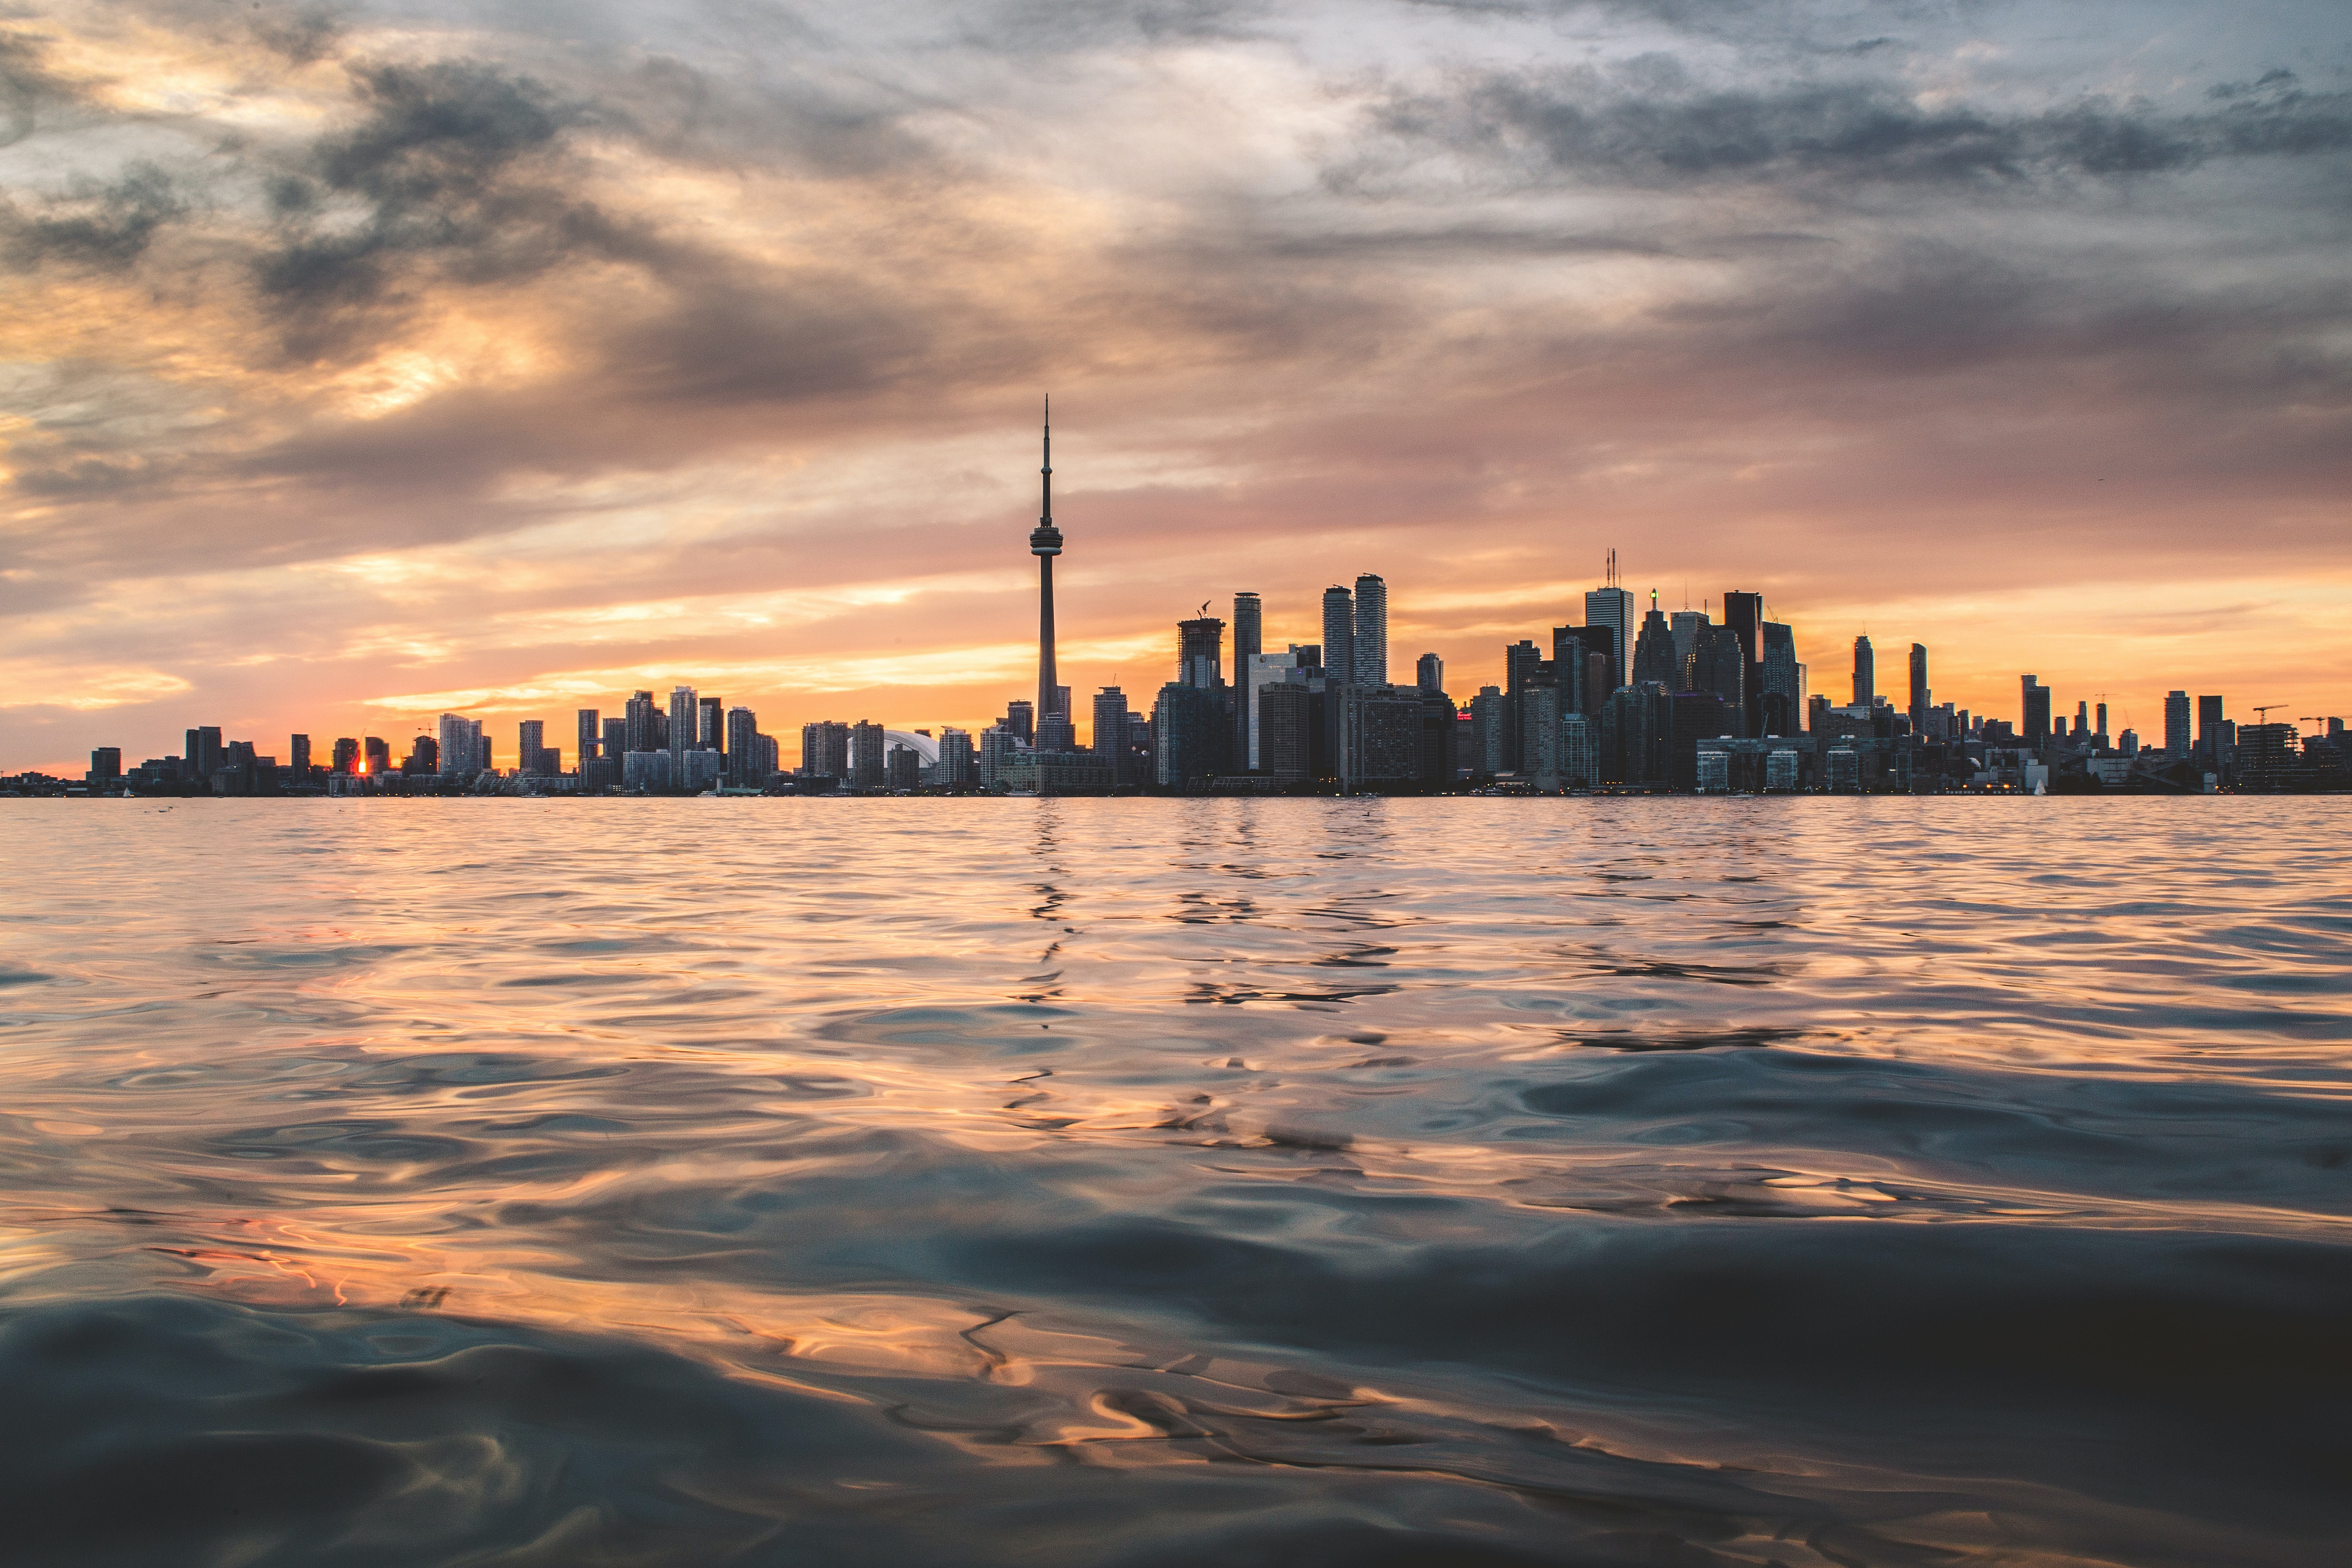 Planning your Toronto itinerary – what to do and where to go